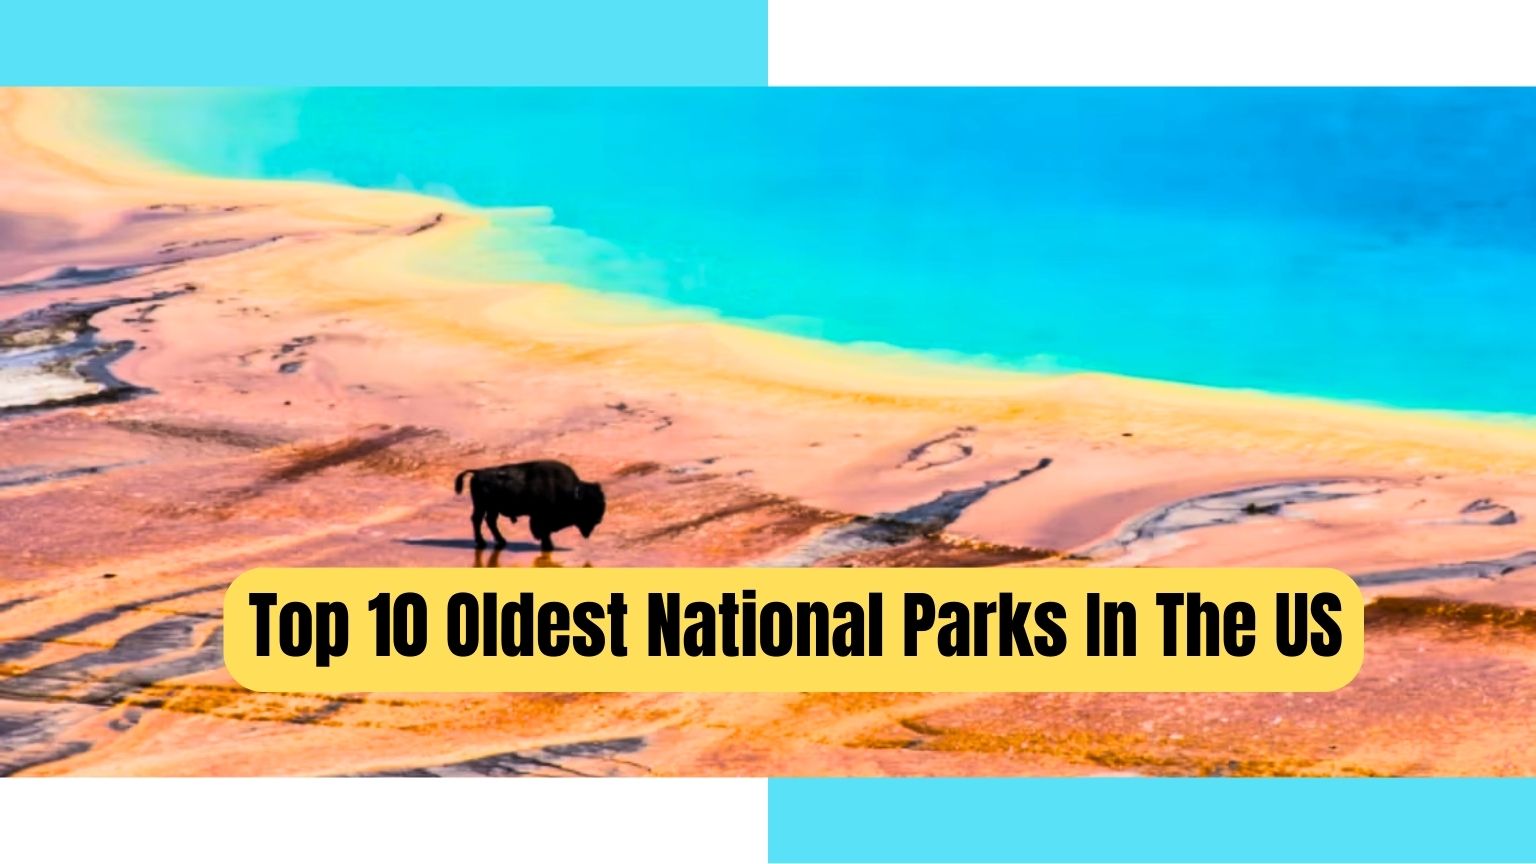 Top 10 Oldest National Parks In The US, Oldest National Parks In The US, Oldest National Parks In US, Oldest National Parks US, Oldest National Parks In The United States, Oldest National Parks United States,